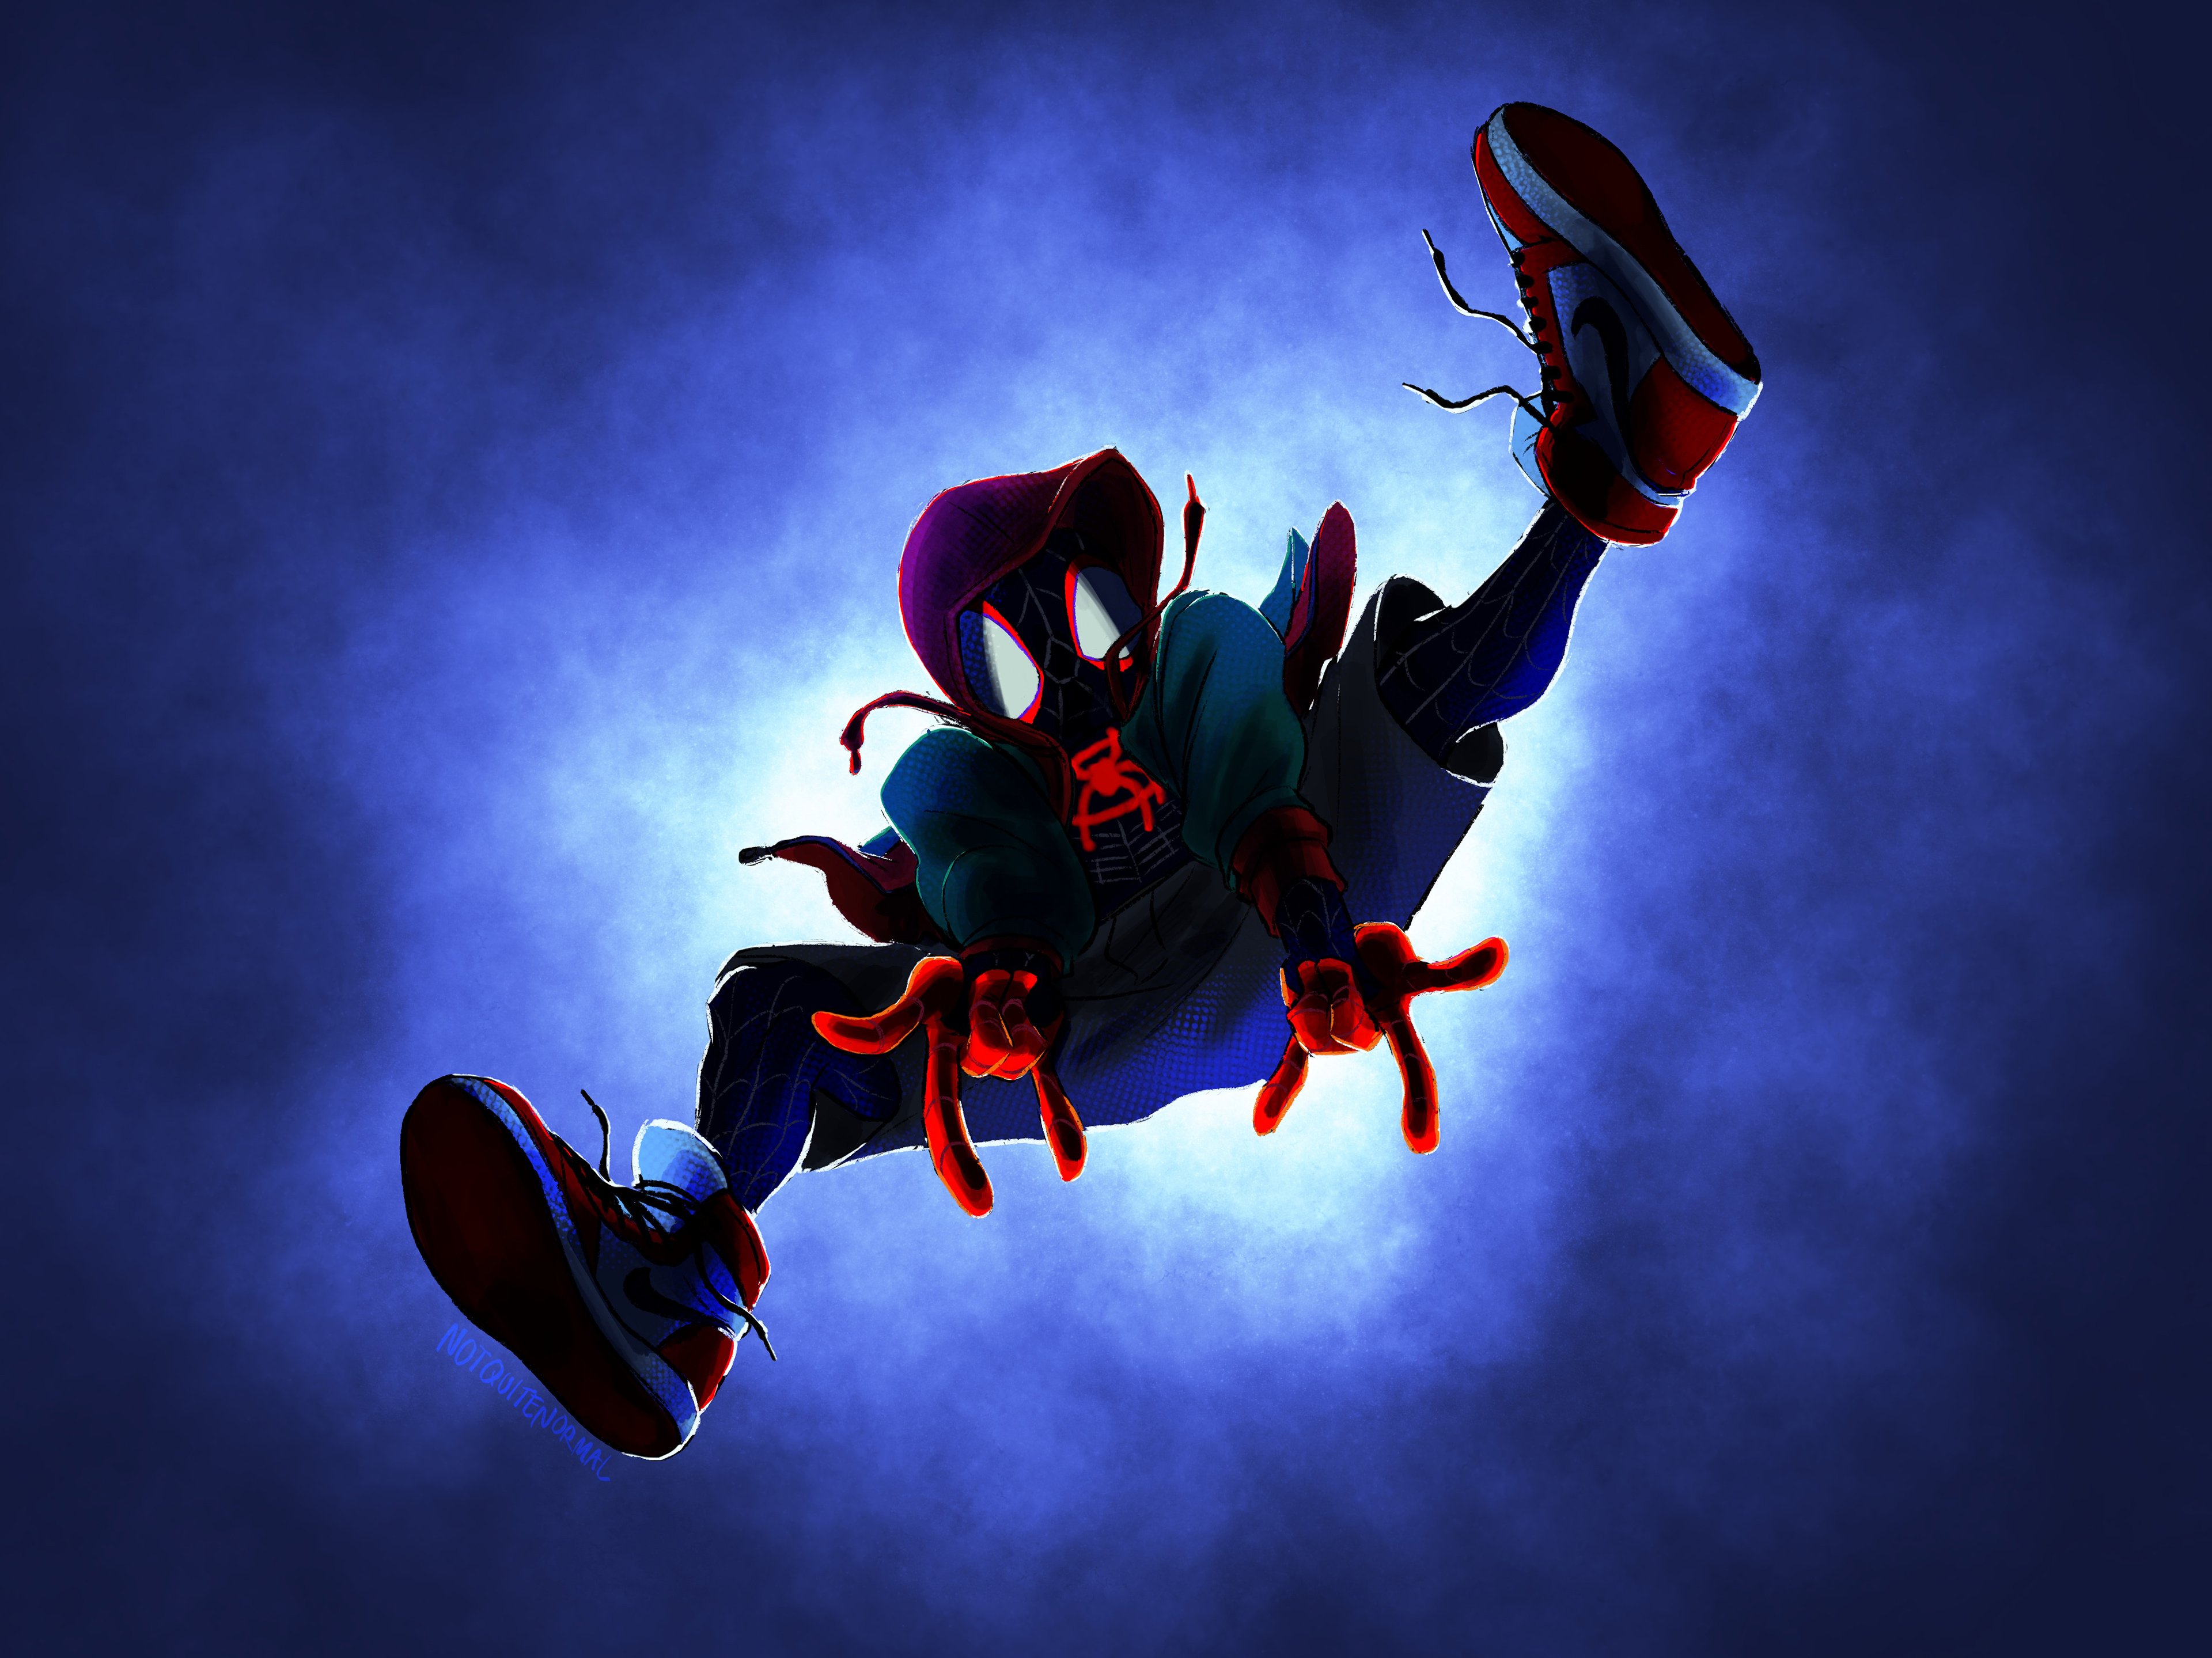 spider man miles morales psp iso